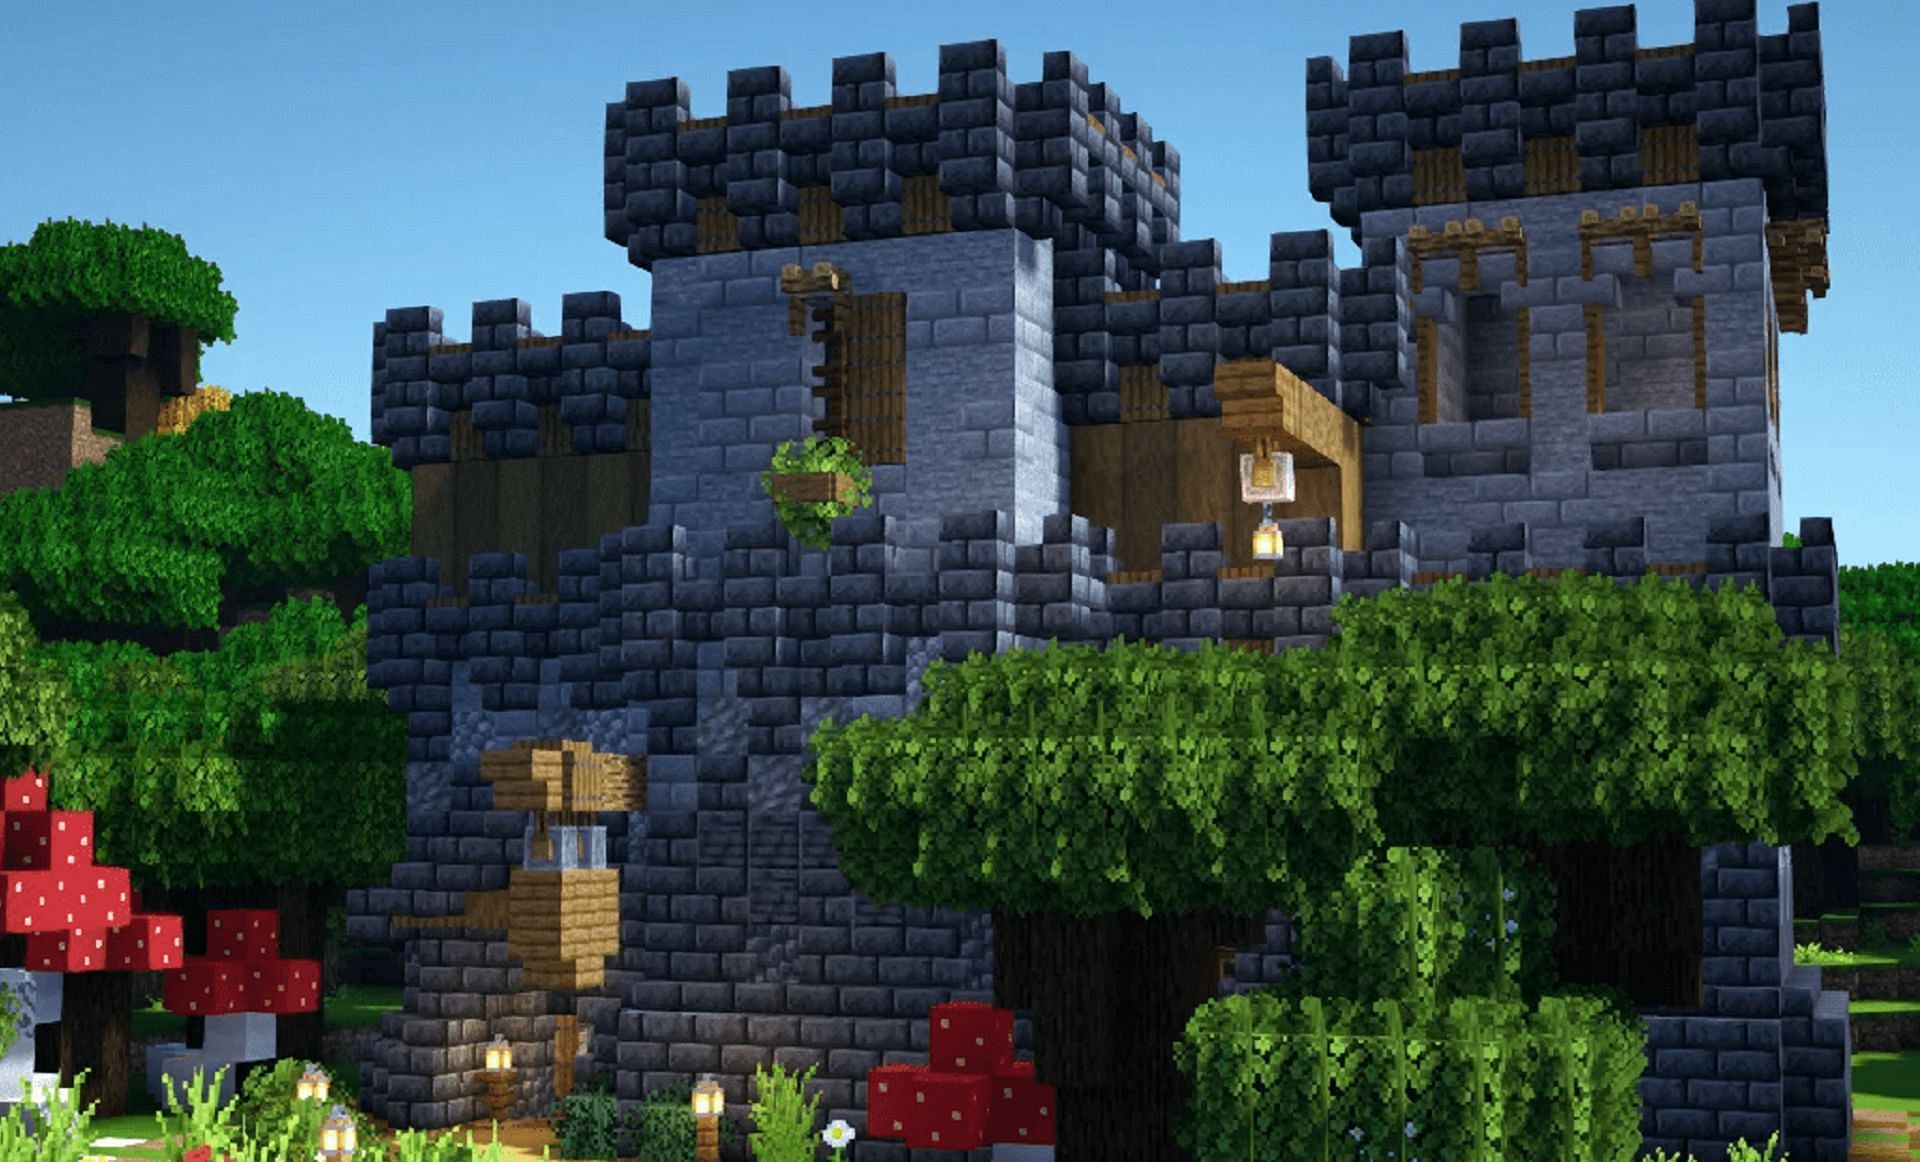 This Minecraft mansion is both fortified and aesthetically appealing (Image via Vanilla_Xtract/Reddit)